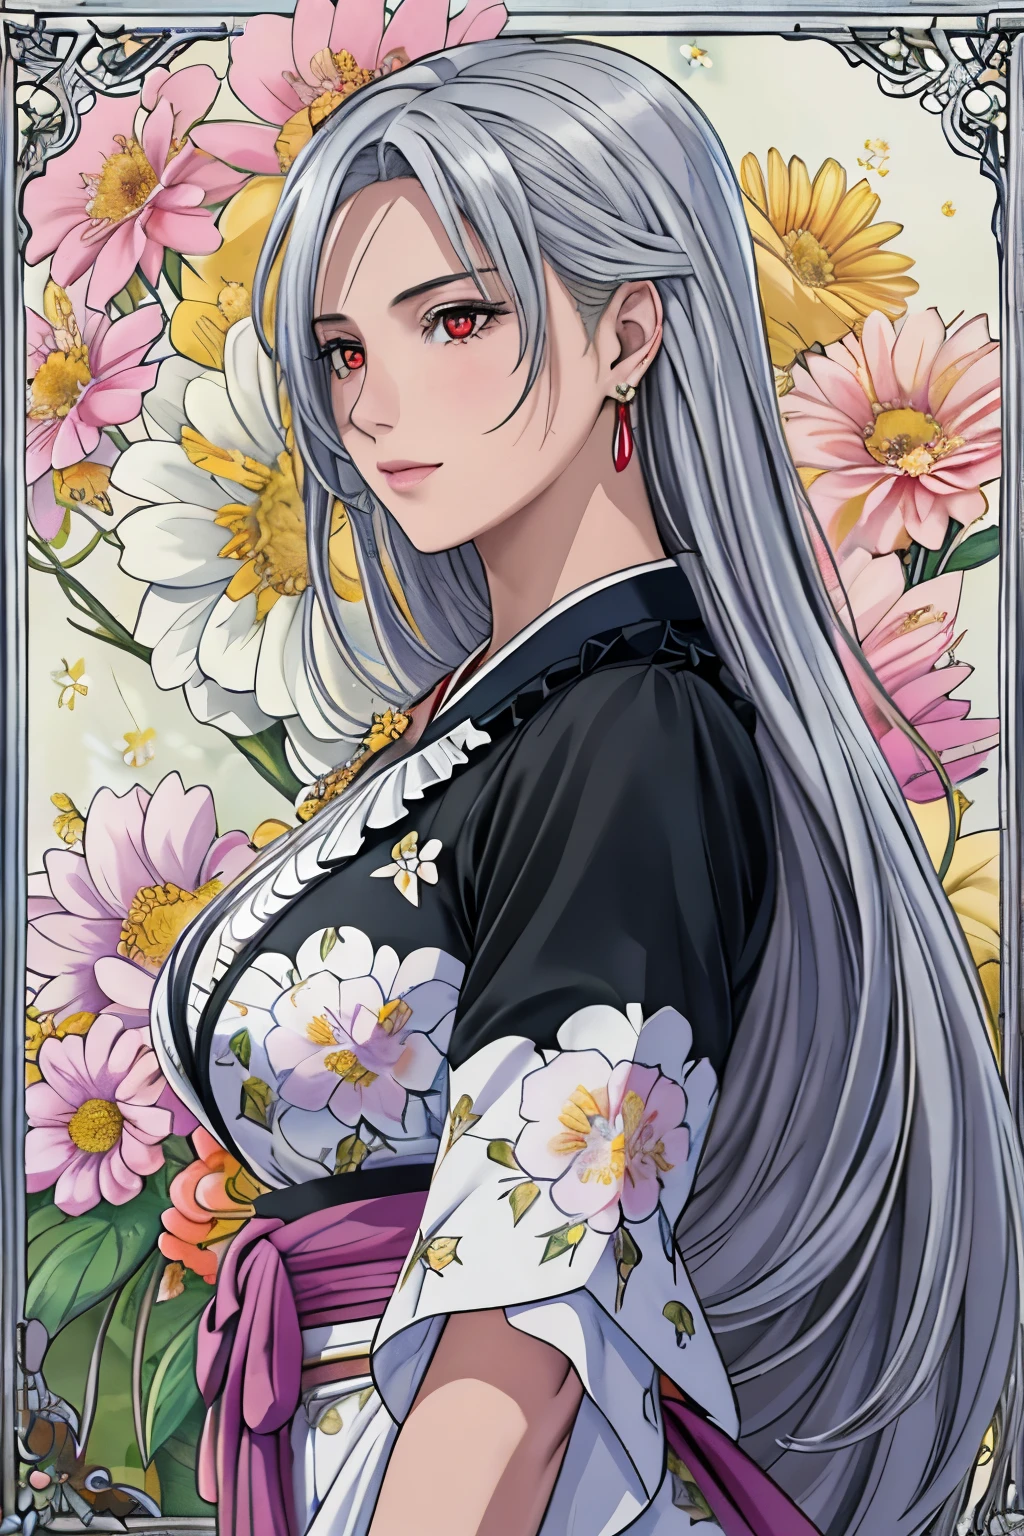 (​masterpiece, top-quality, top-quality, Official art, Beautifully Aesthetic:1.2), red eyes, (highest quality, masterpiece painting:1.3), immature woman, 16 years old, (half body shot), masterpiece, ultra high resolution, (((Flower frame, A lot of flowers in the frame, round frame, A beautiful girl fits into the frame))), Decorative panel, abstract art, (shot from a side angle), (Photoreal:1.0), ((light silver hair)),straight hair, beautiful shining hair, white and shining skin, Painterly, sketch, Texture, 超A high resolution, solo, Beautuful Women, A highly detailed, (Fractal Art:1.1), (colourfull:1.1), (florals:1.6), The most detailed, (Zentangle:1.2), (Dynamic Poses), (Abstract background:1.3), (shinny skin), (Many colors:0.8), (earrings:1.4), (pluma:0.9), Taisho romance